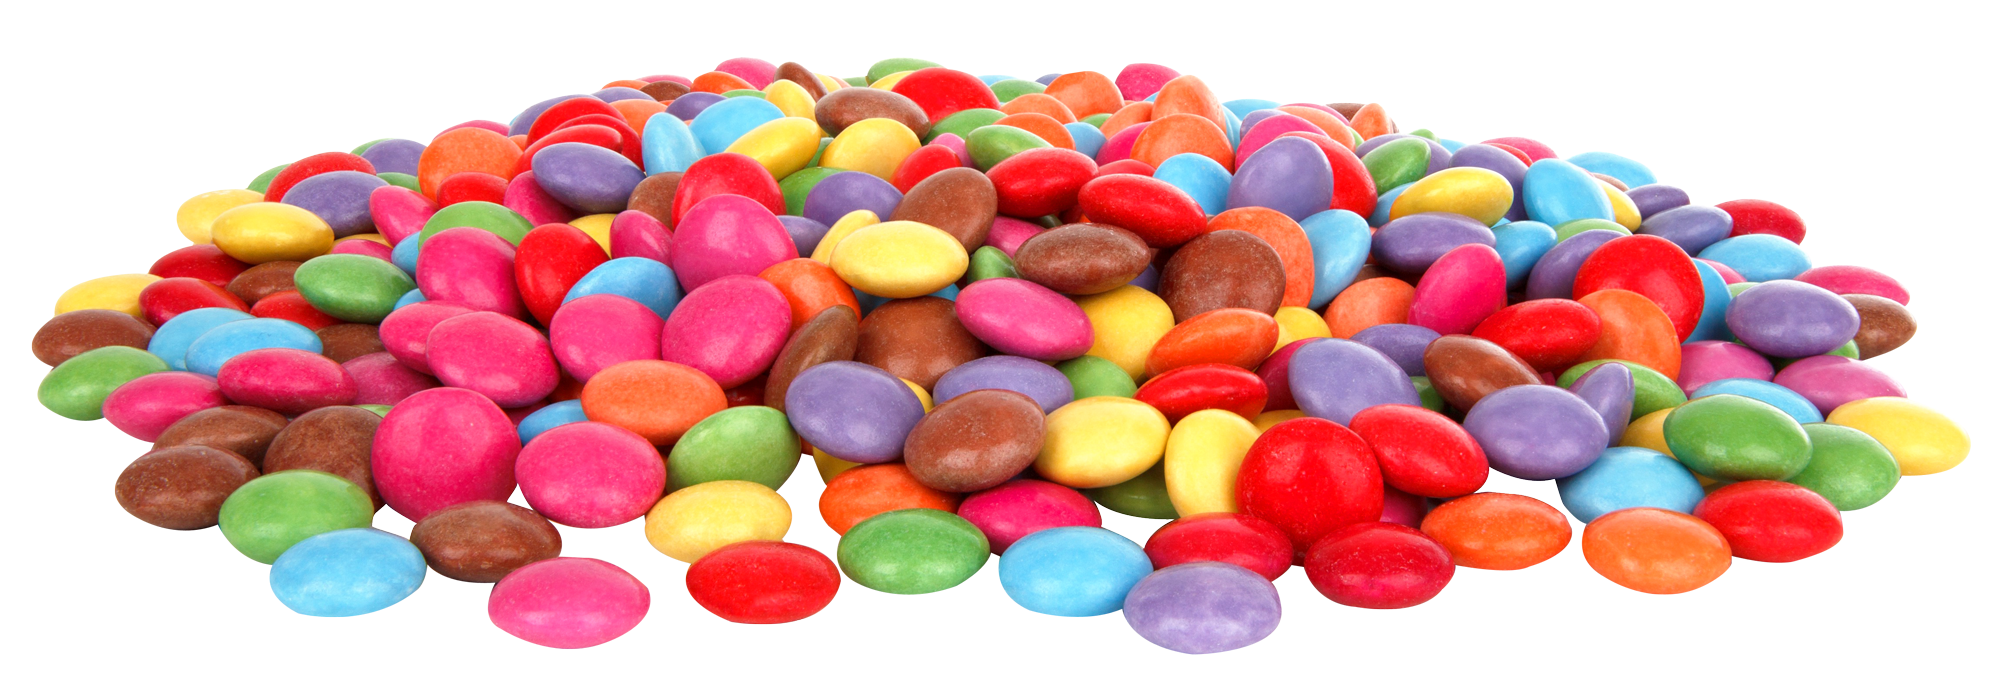 Candy Transparent Images